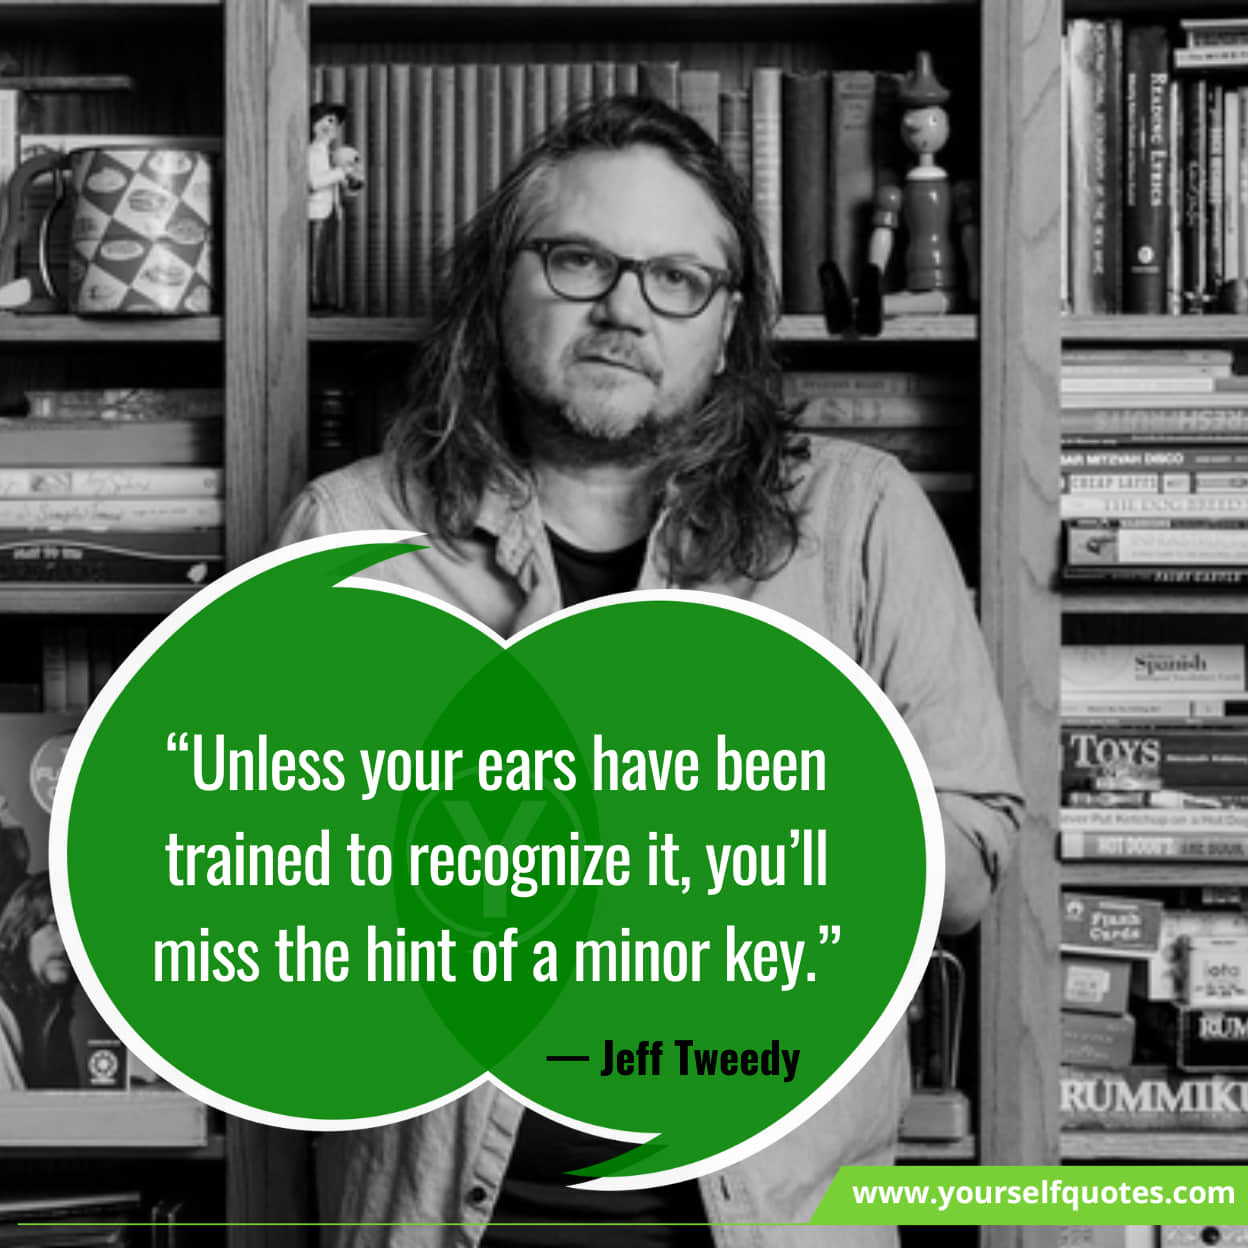 Jeff Tweedy's Quotes For Choices